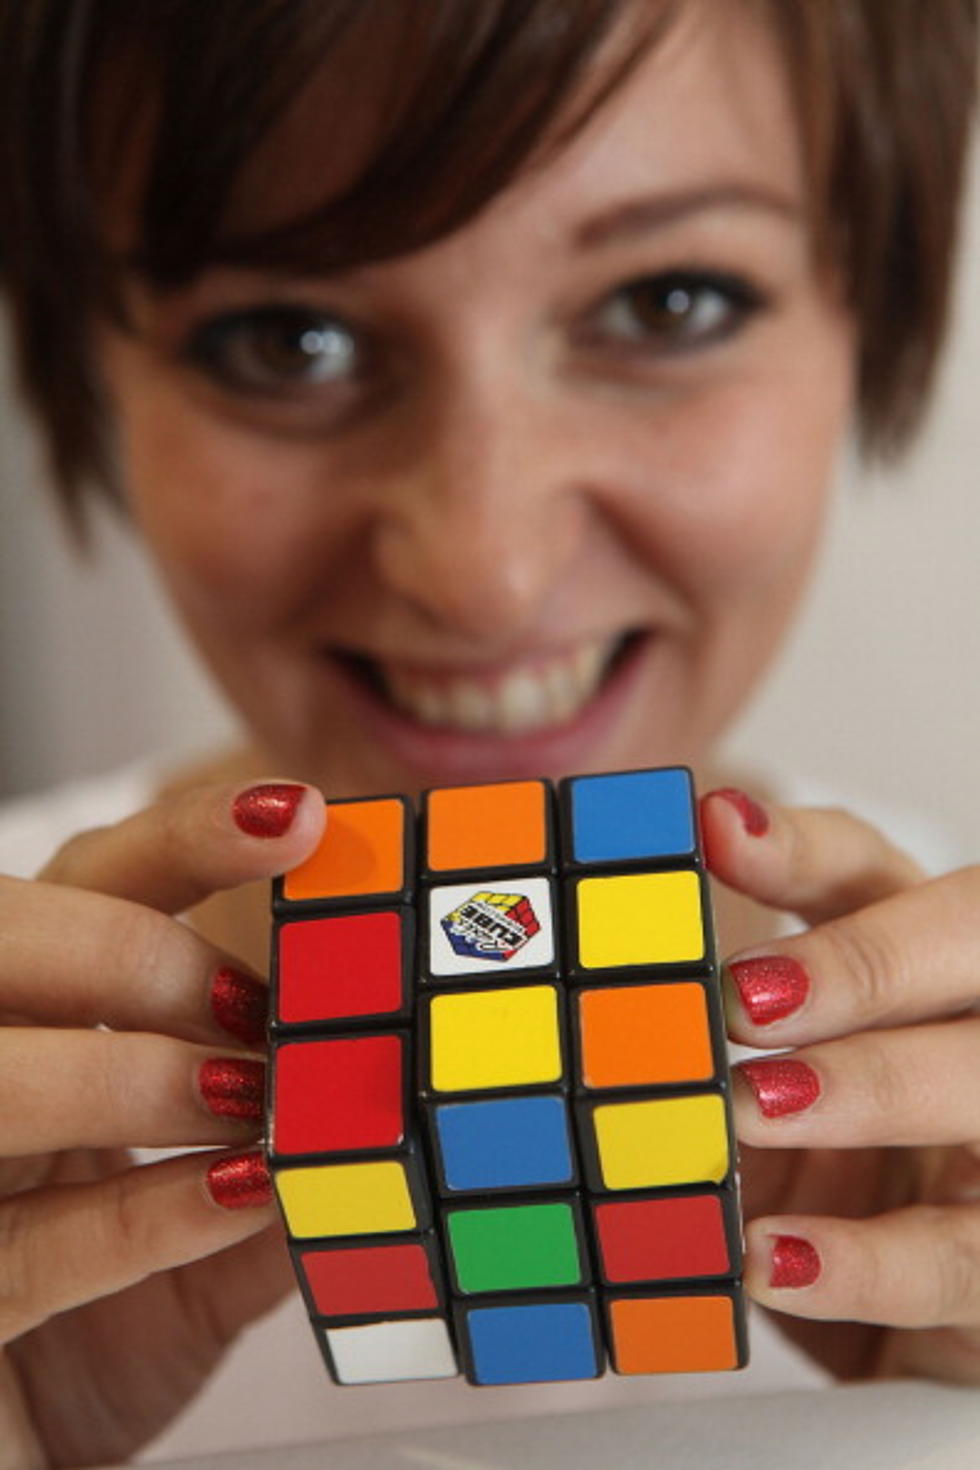 Man Juggles Two Rubik’s Cubes While Solving Third [VIDEO]